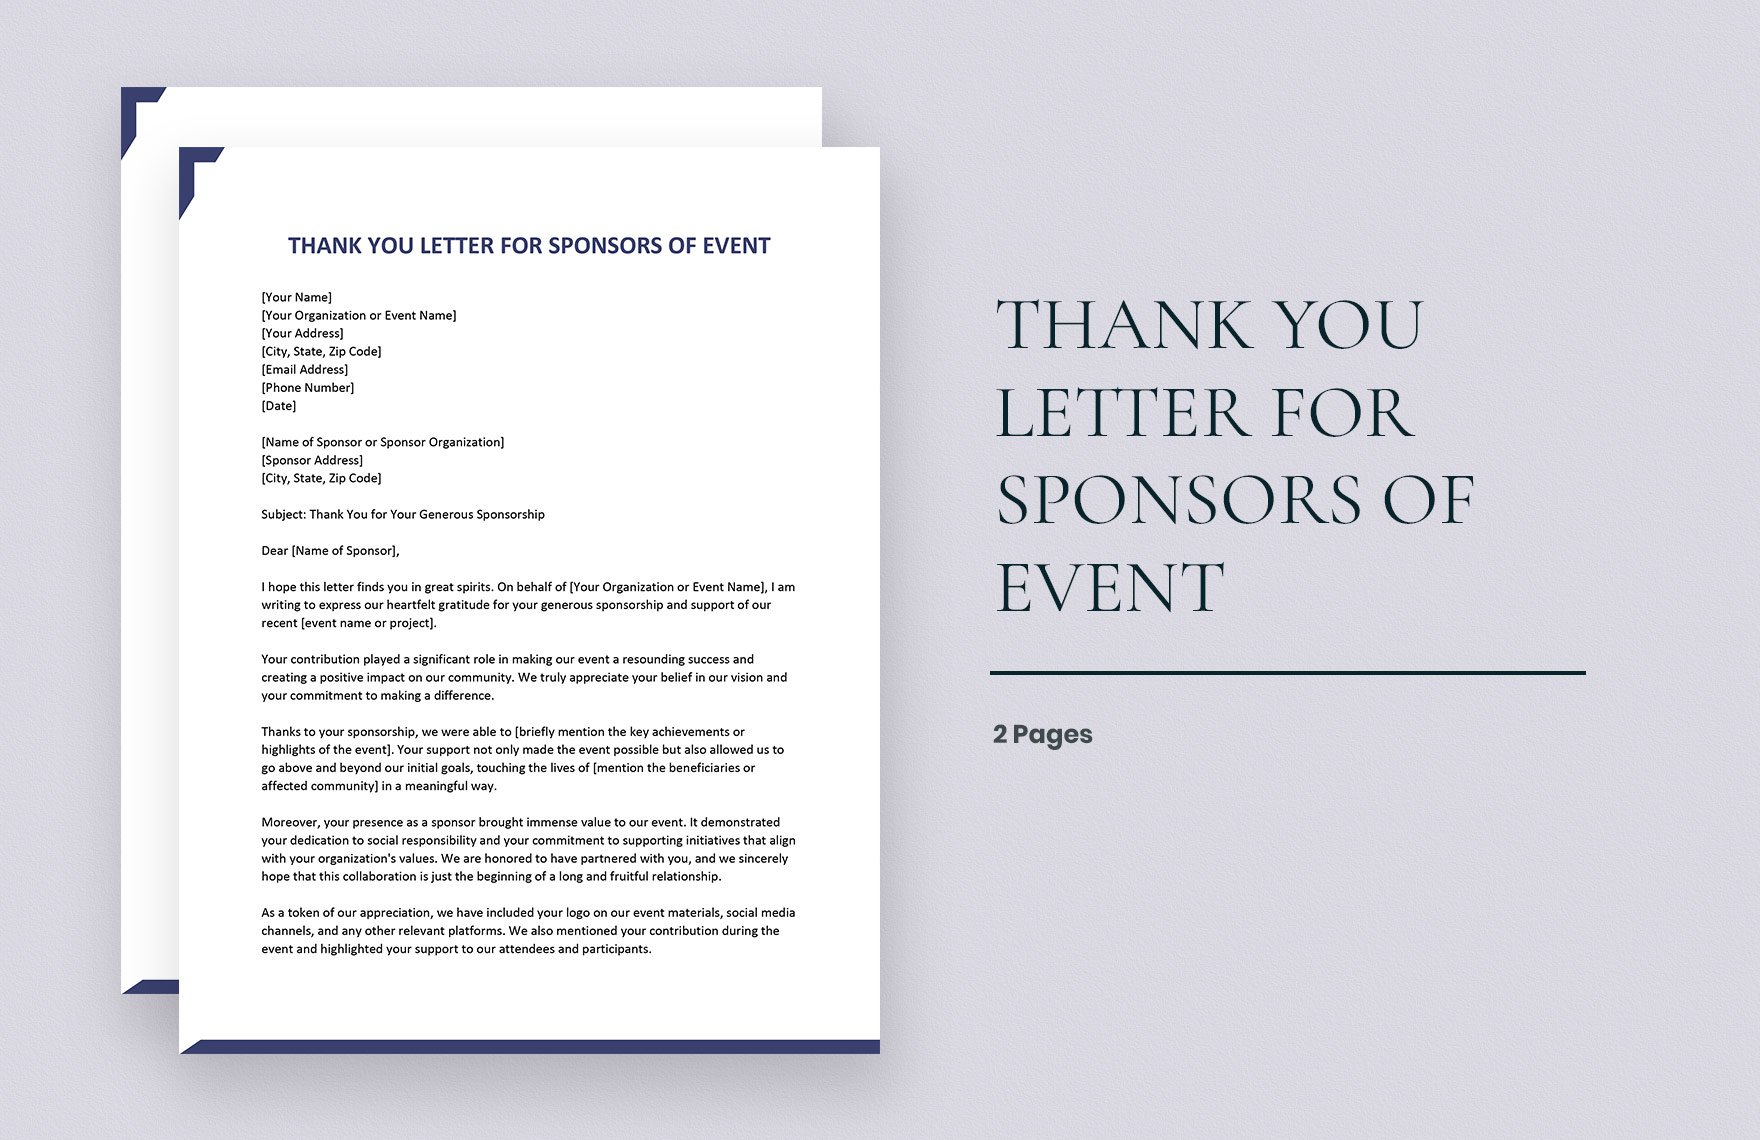 Thank You Letter for Sponsors of Event